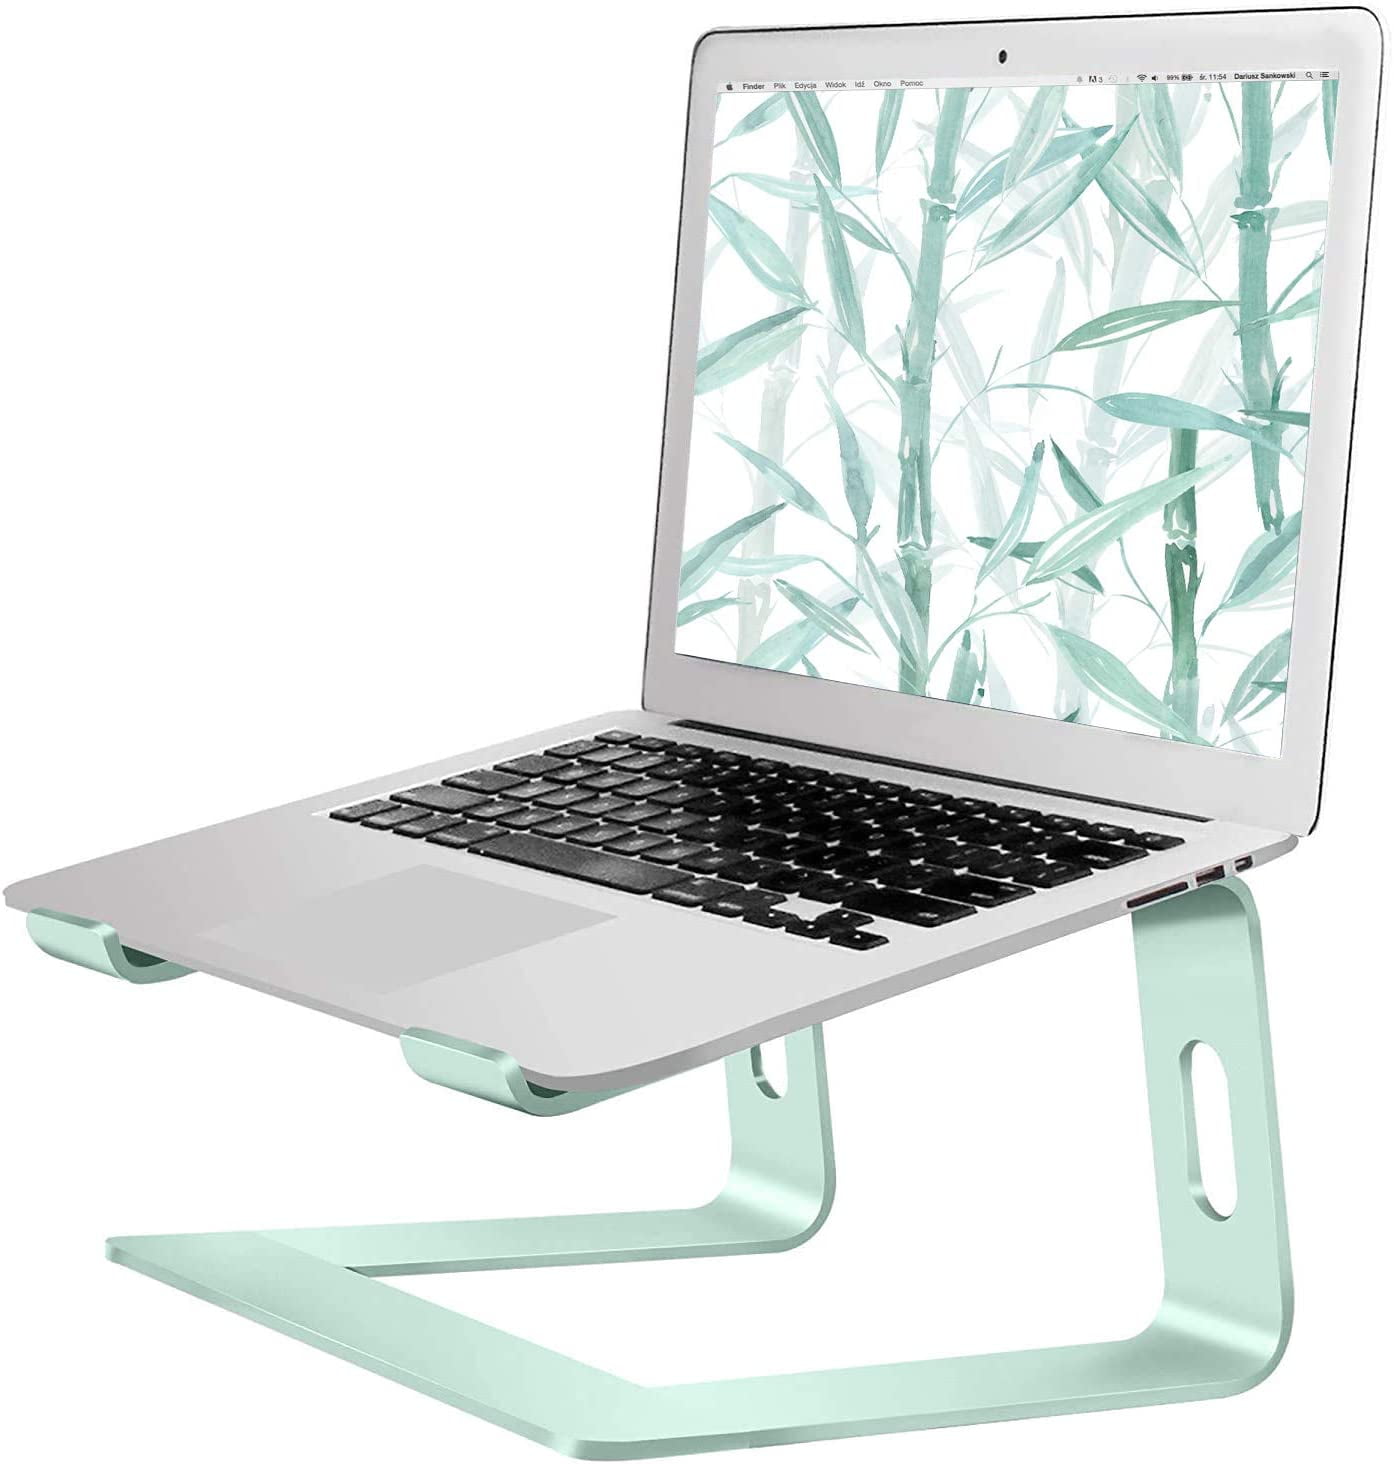 Laptop Stand Laptop Holder Riser Adjustable Height Foldable Portable Aluminum MacBook Holder Notebook Stand Compatible with 9-15.6 inch Laptops